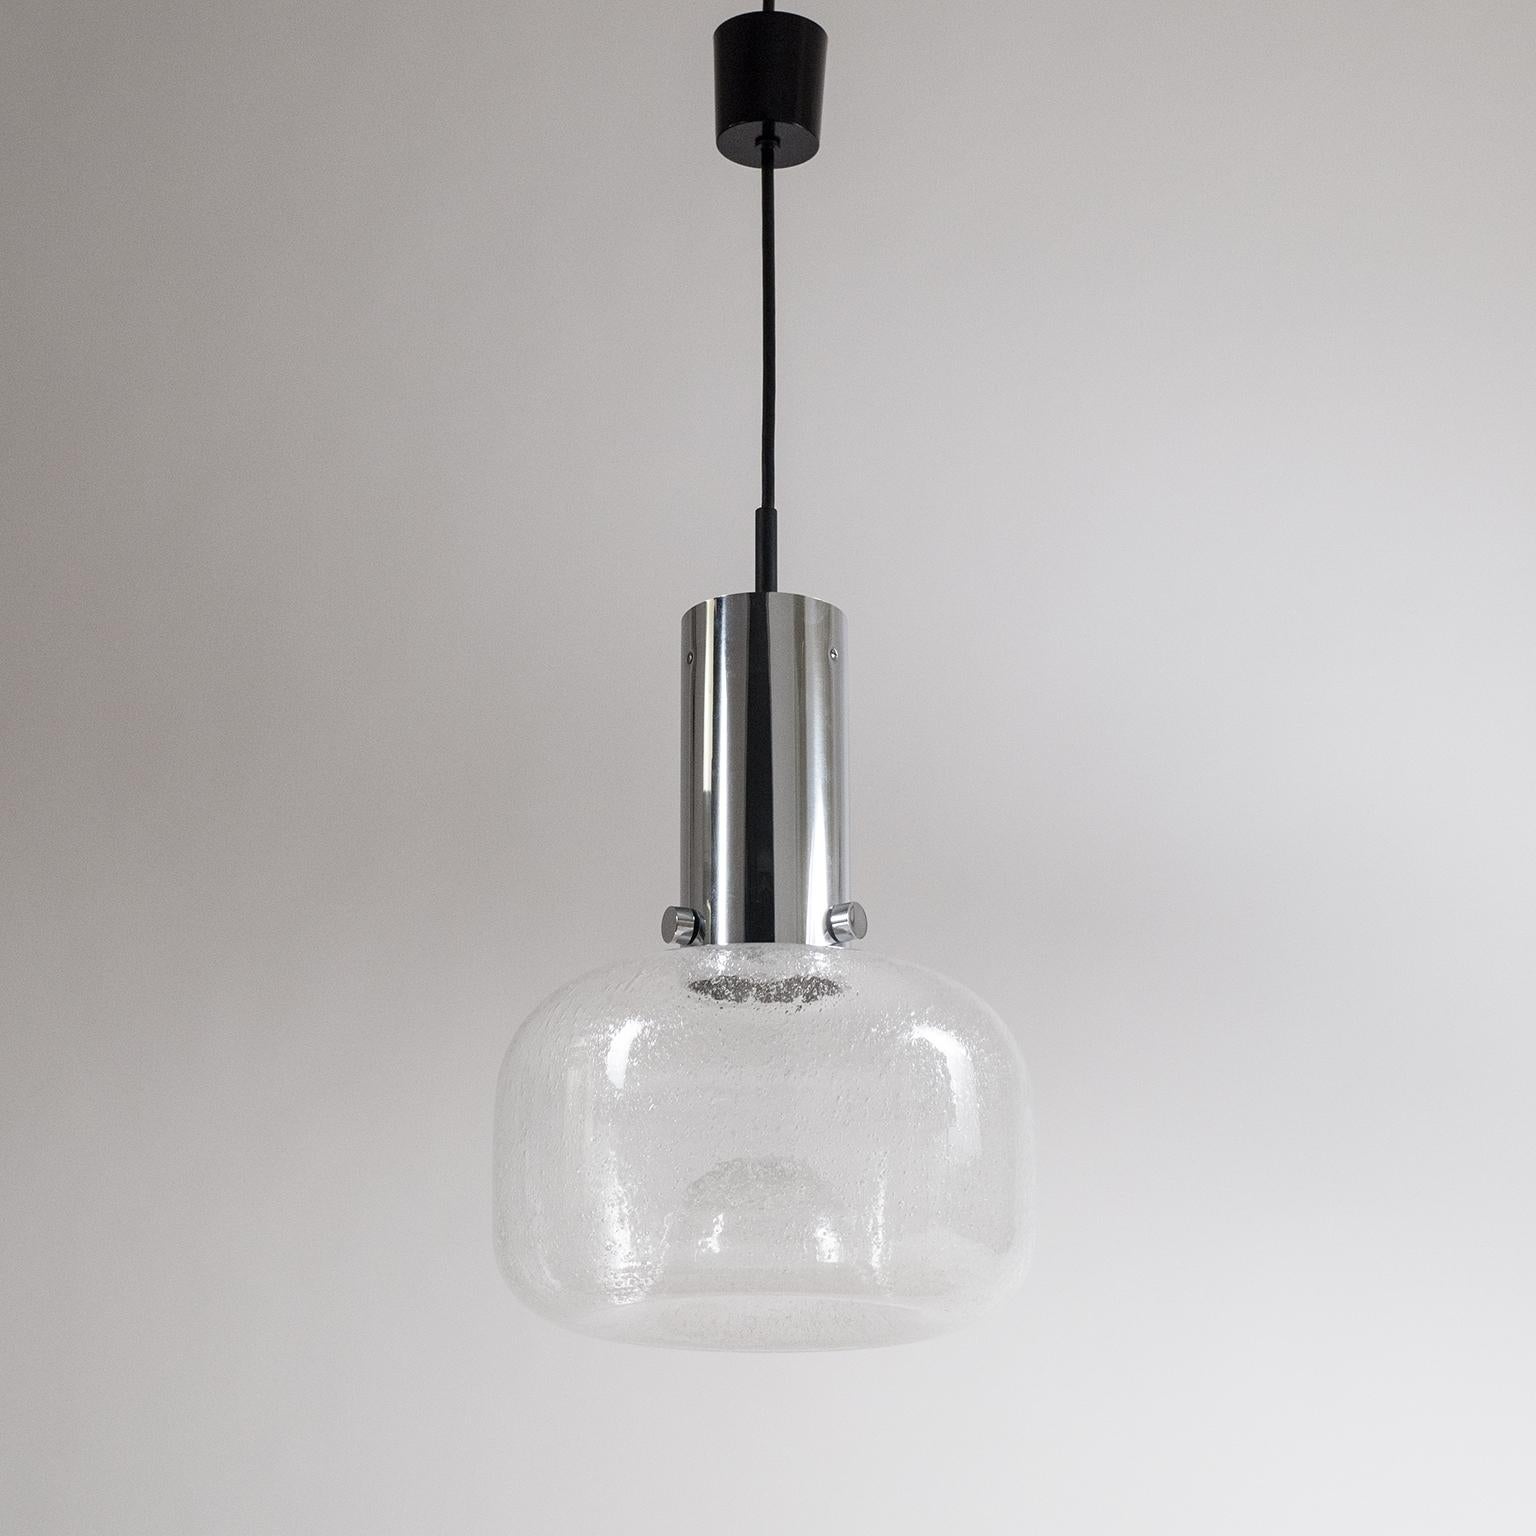 Excellent Space Age pendant by Limburg, Germany, 1970s. The beautifully shaped blown clear glass body contains countless small air bubbles for a spectacular light effect. The E27 socket is recessed far into the chrome tube so that the light source